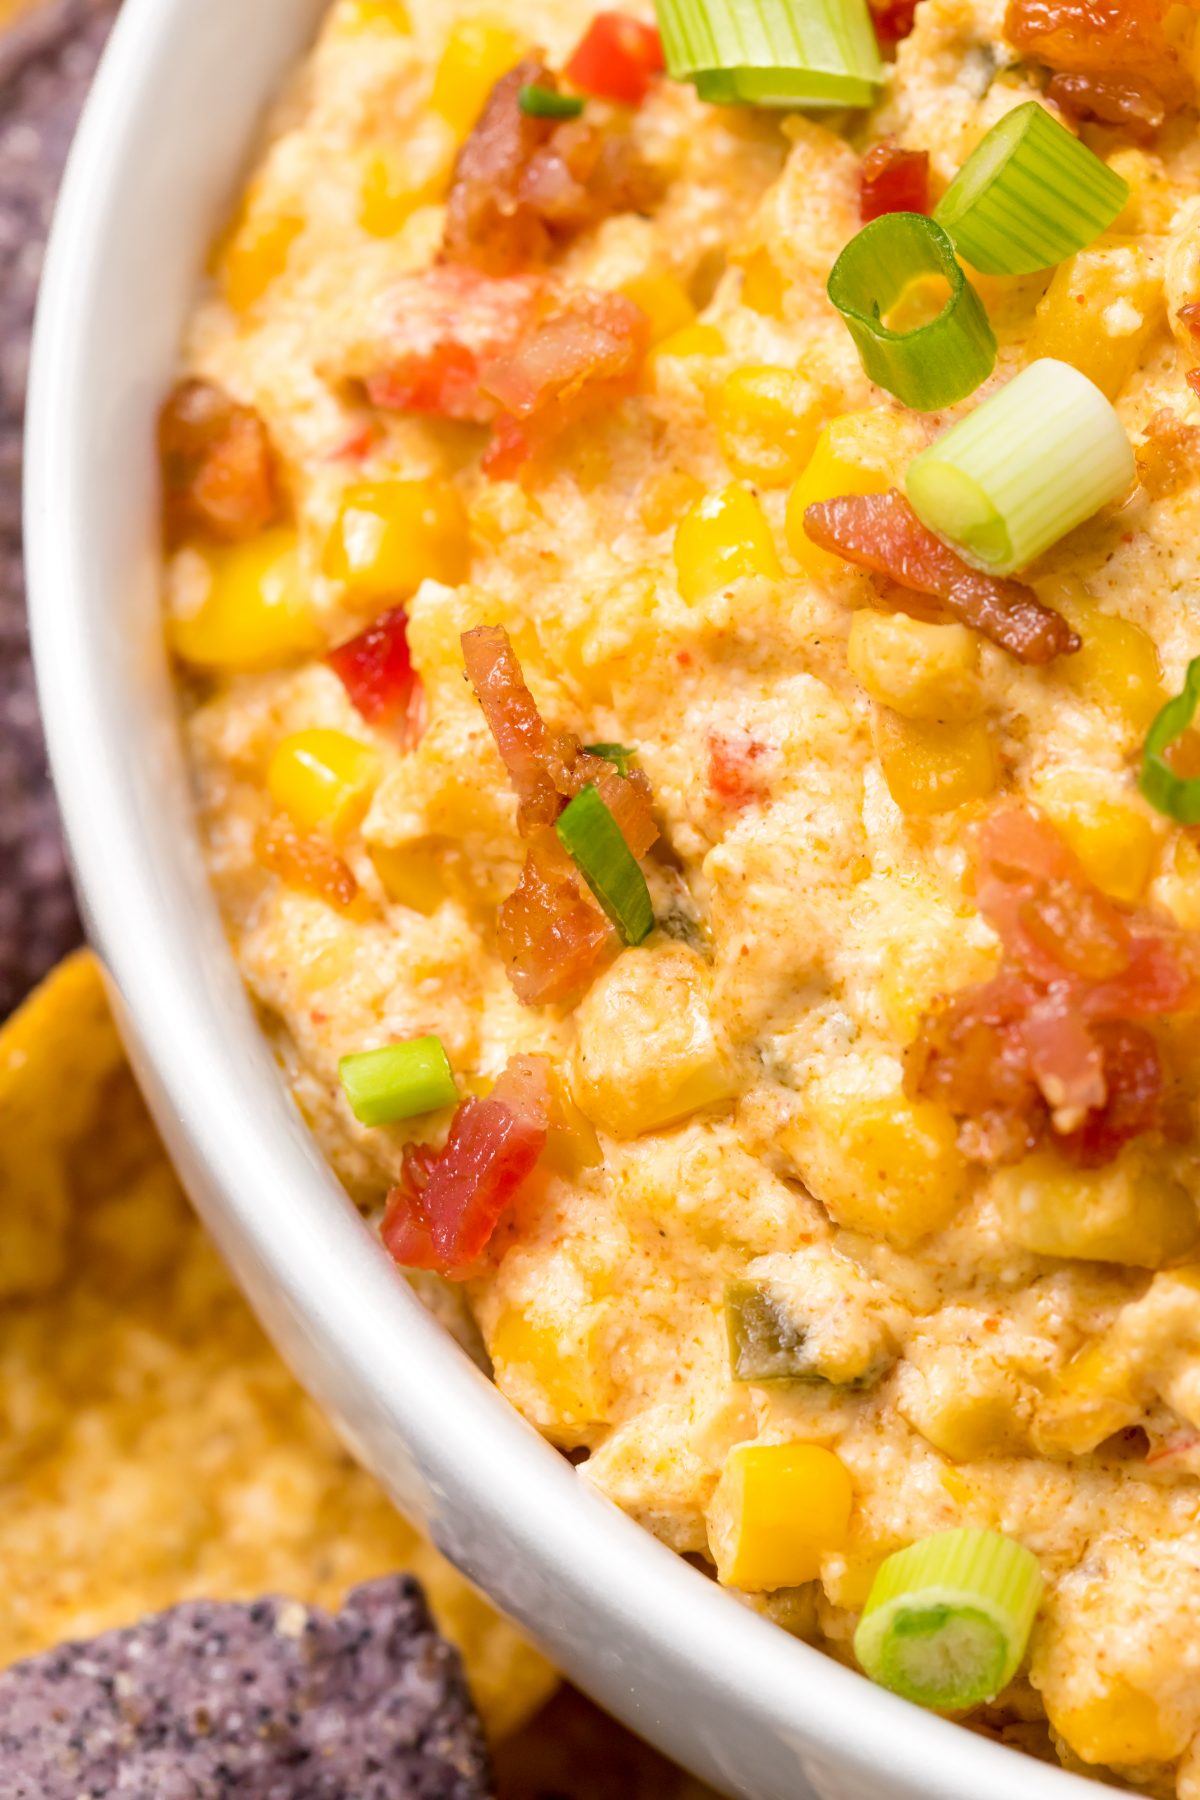 Creamy cheese, with crispy bacon, sweet corn and spices are delicous together!